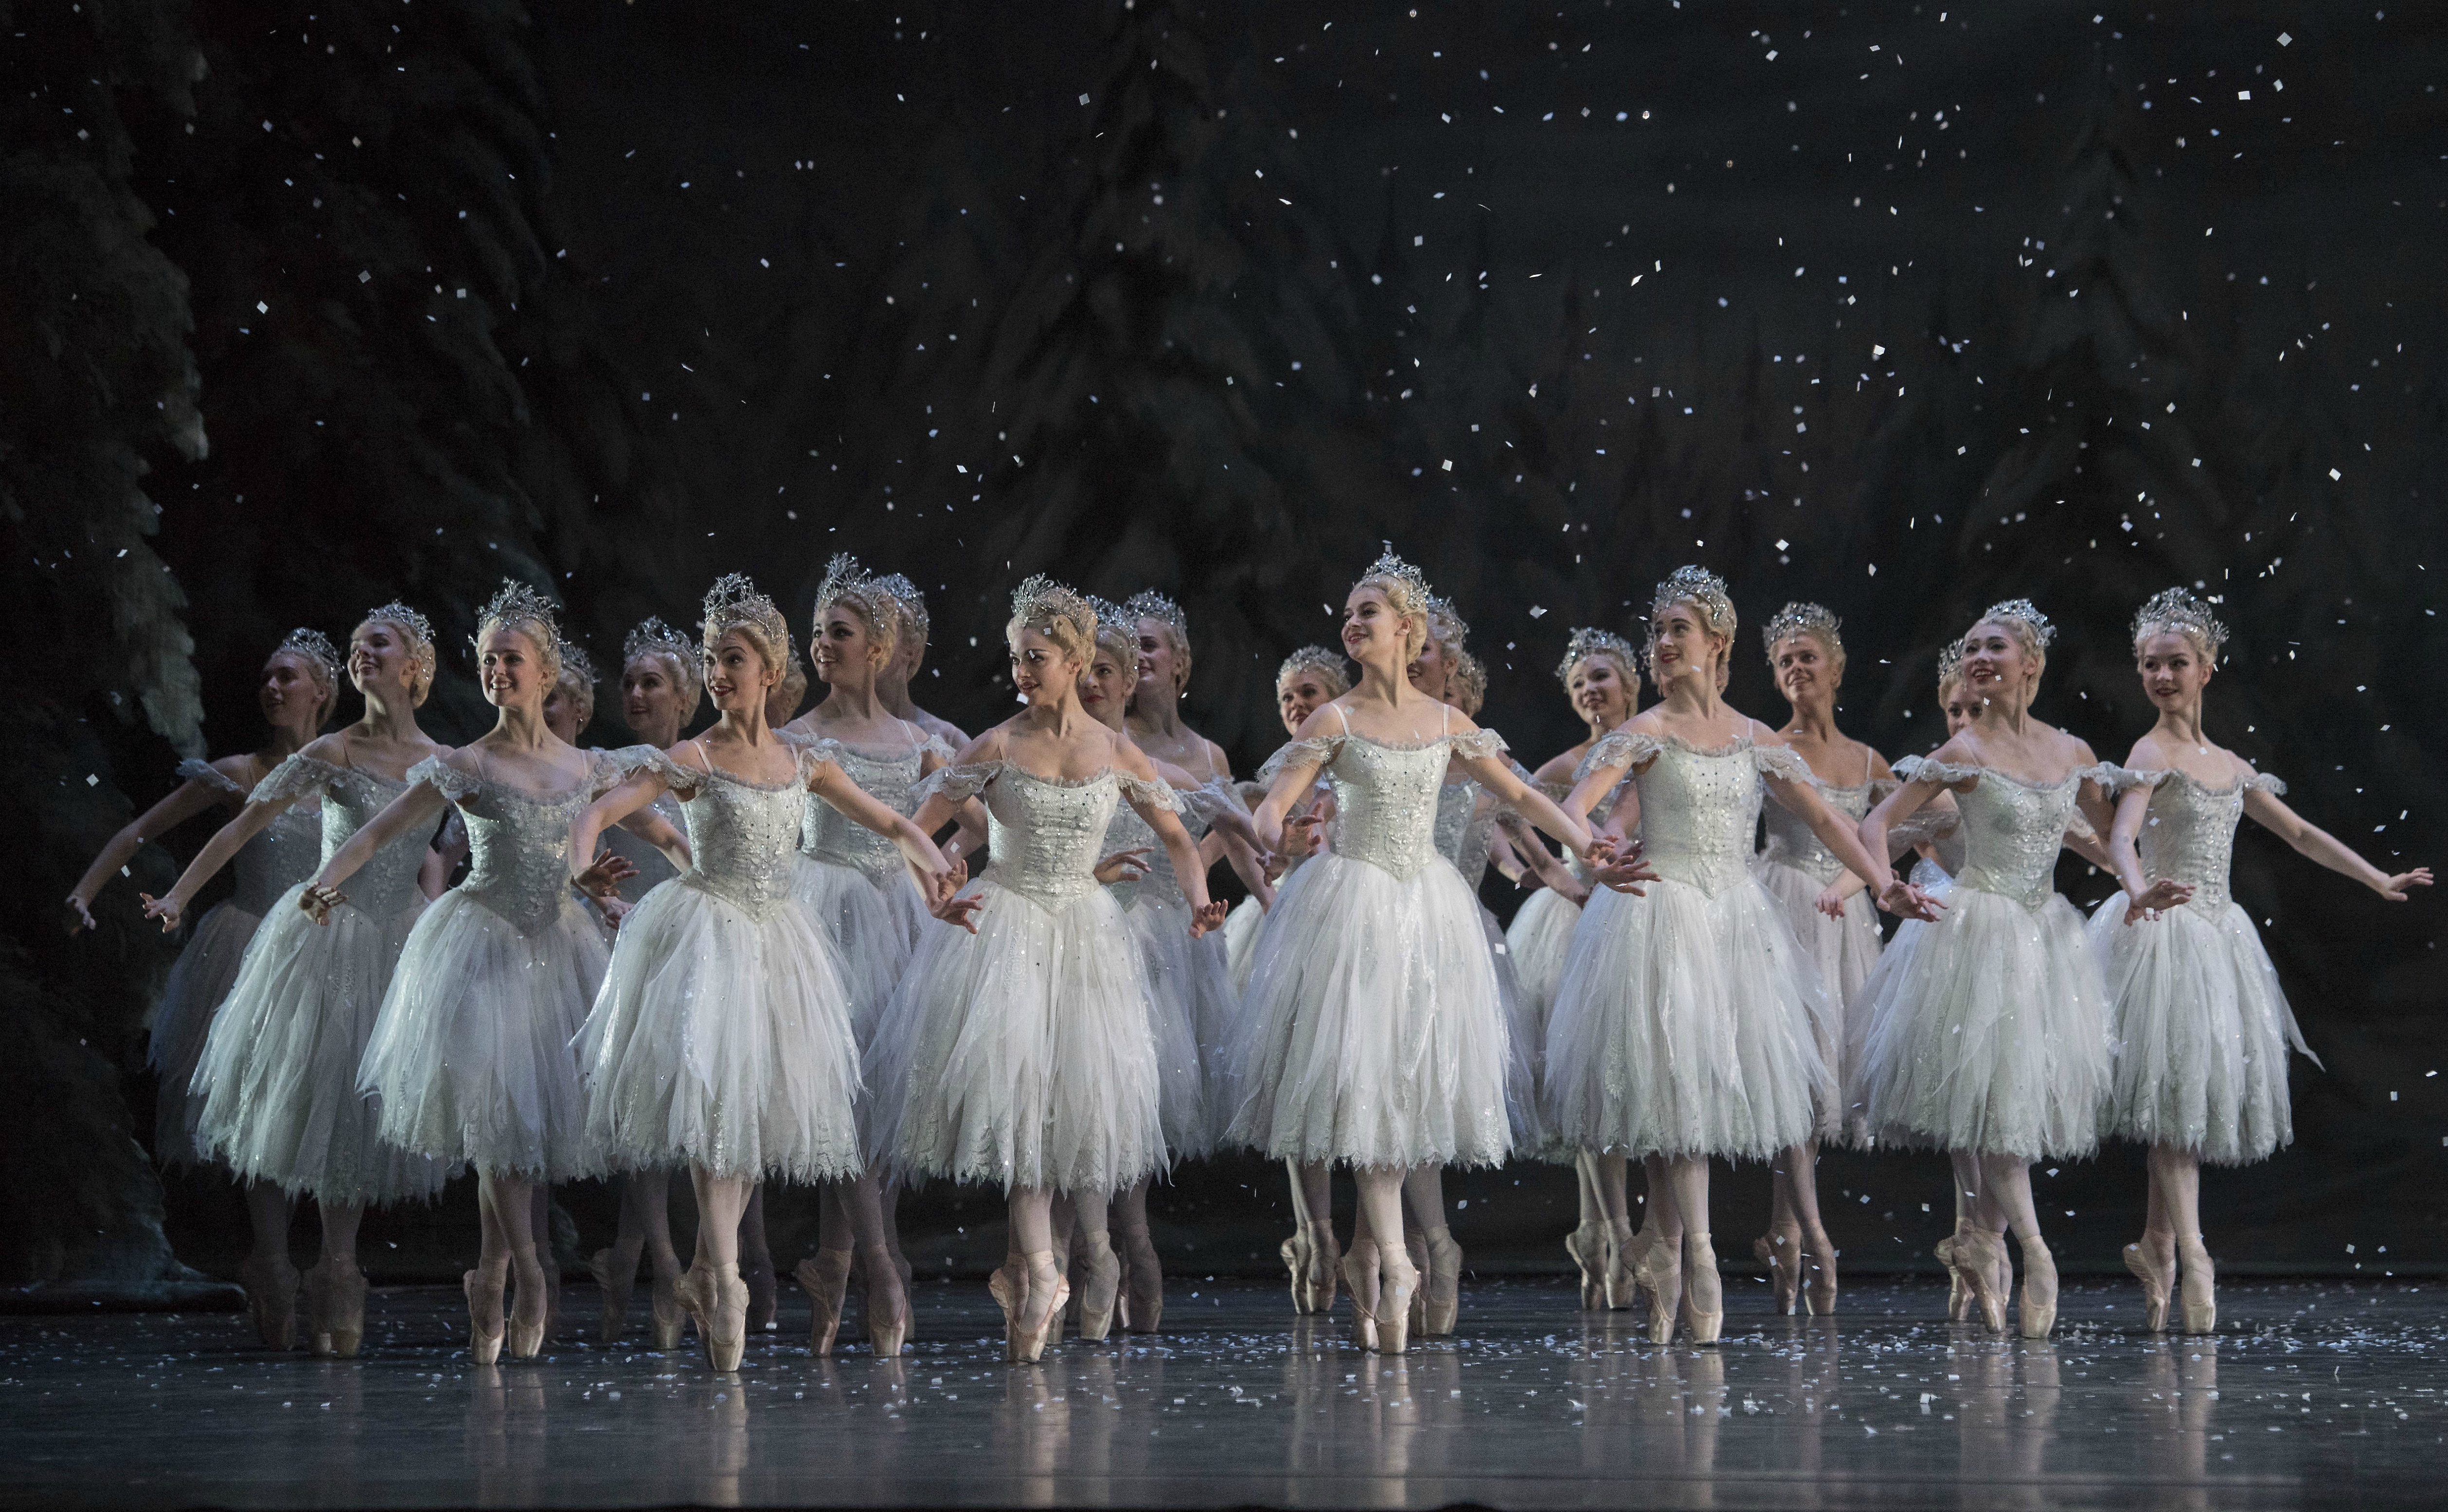 Artists of The Royal Ballet in the Nutcracker. Photo by Alastair Muir/Rex Features